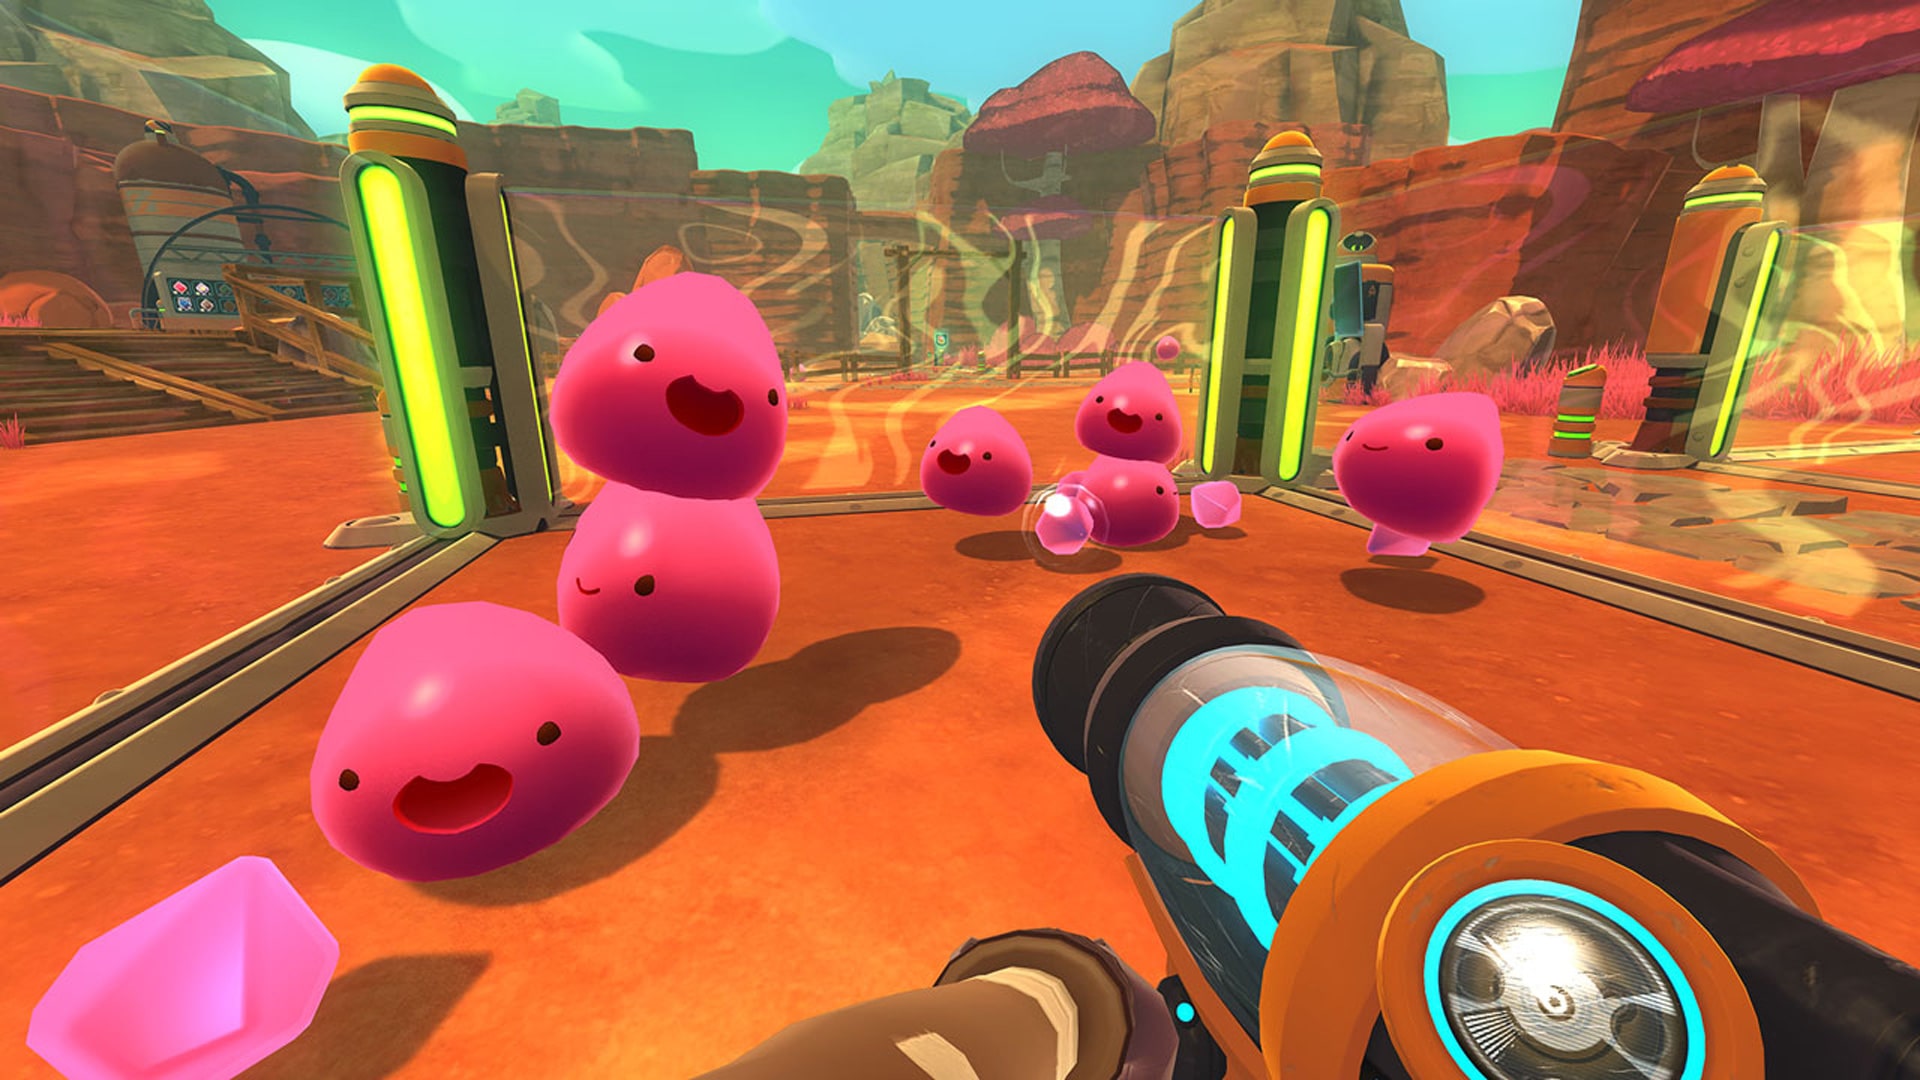 Slime Rancher : Deluxe Edition PS4